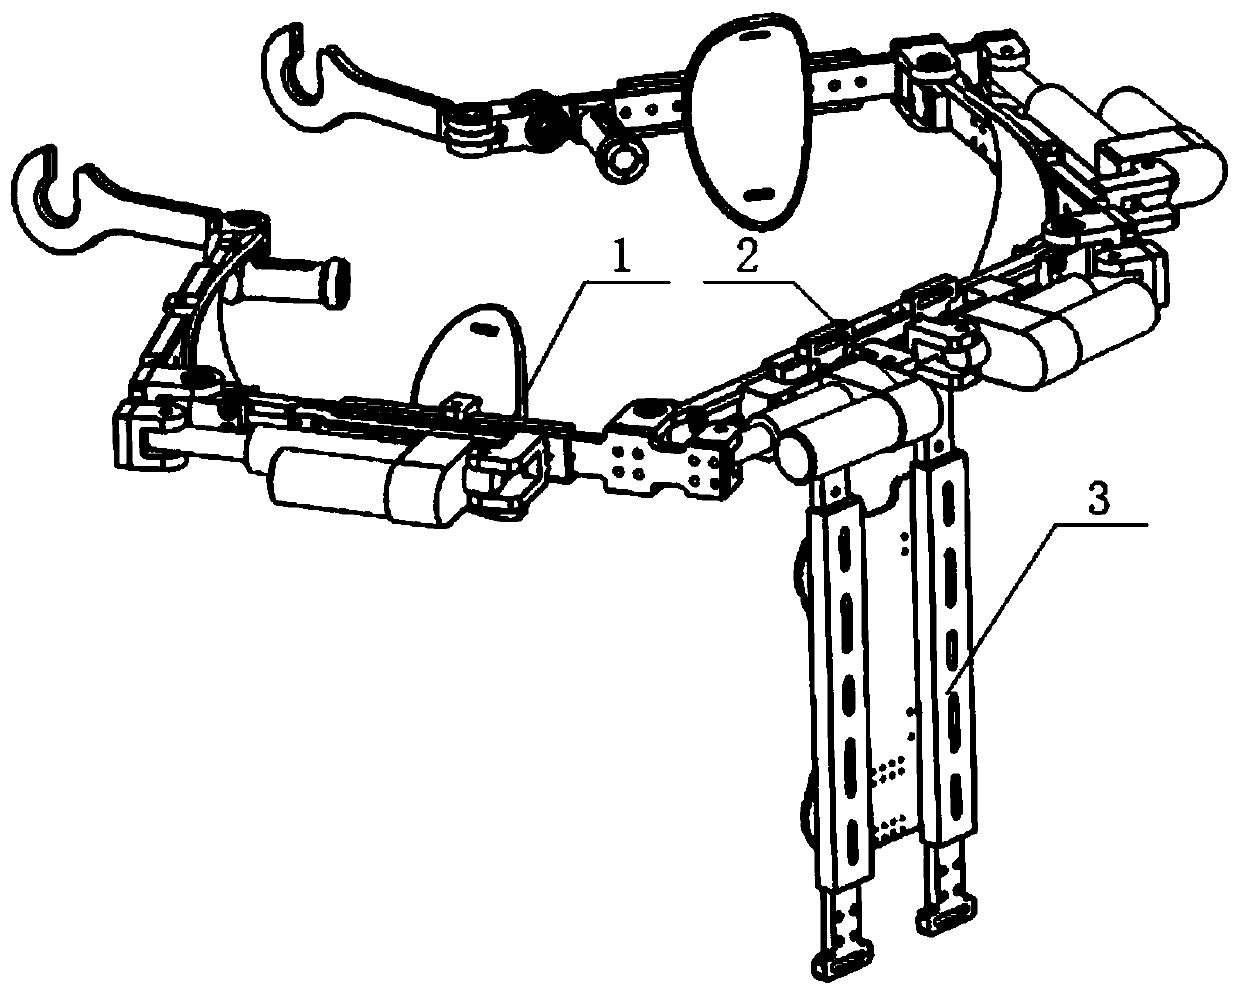 Upper limb structure of rescue exoskeleton robot of active power-assisted armored car